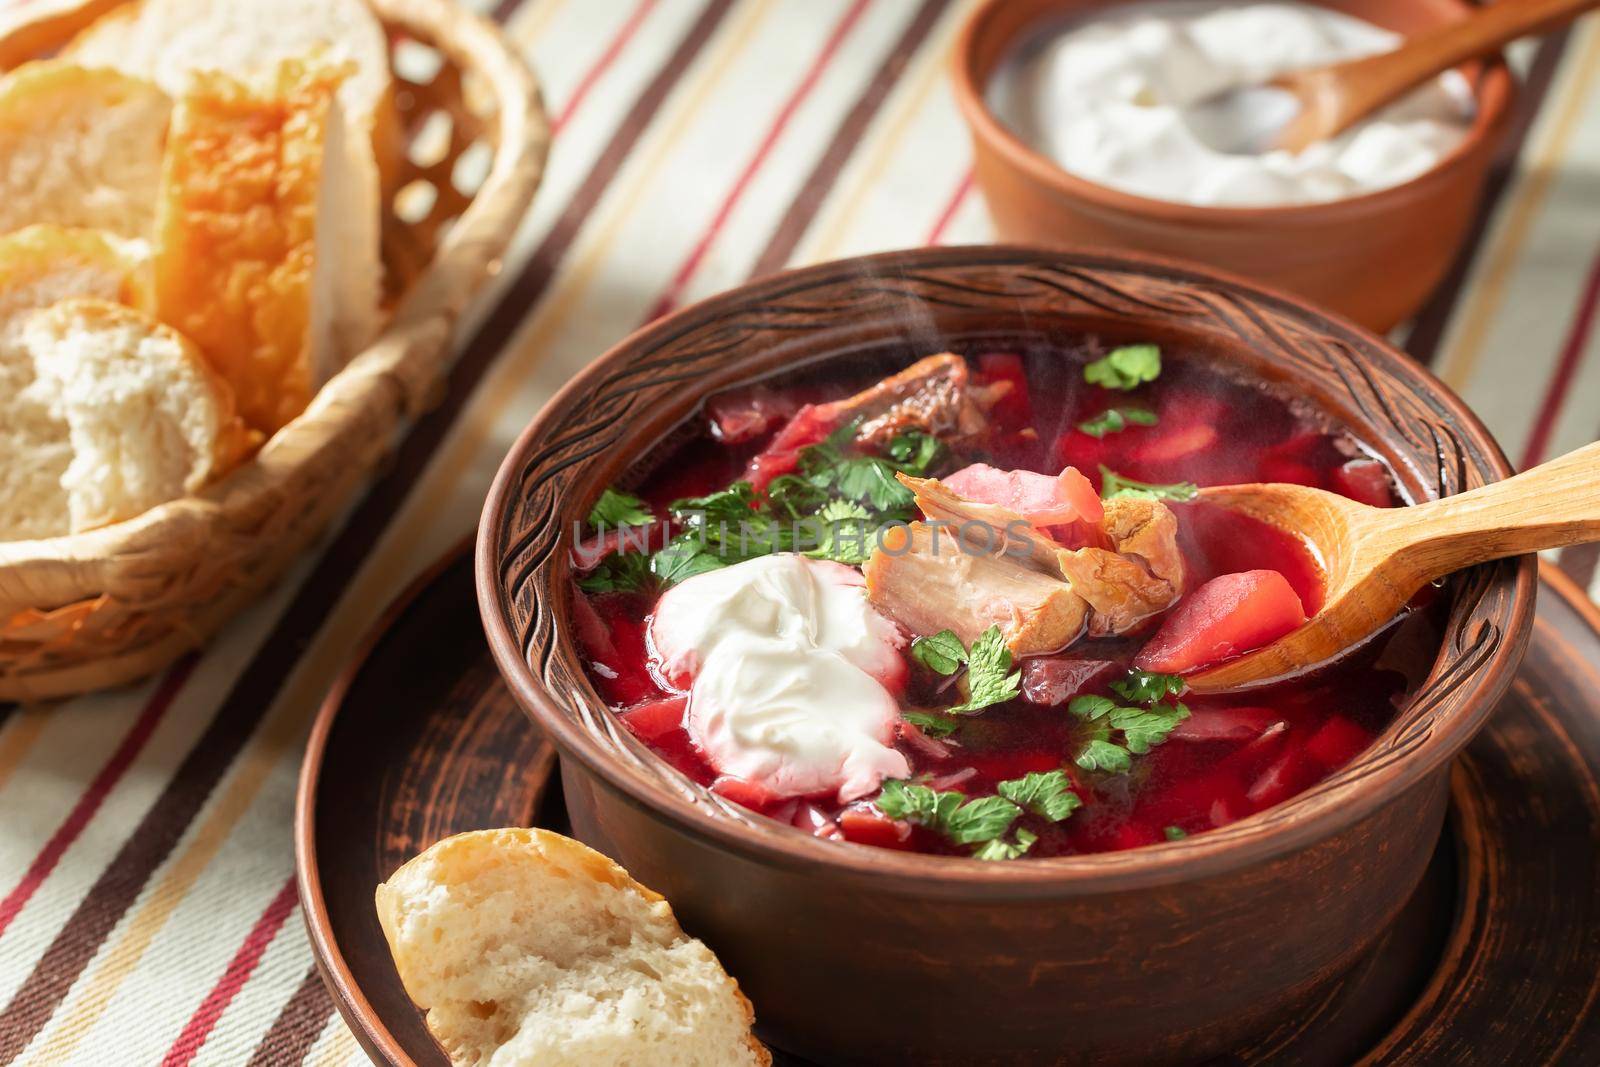 Freshly cooked hot homemade borscht - traditional dish of Russian and Ukrainian cuisine in earthenware dishes with bacon, bread, sour cream and garlic.